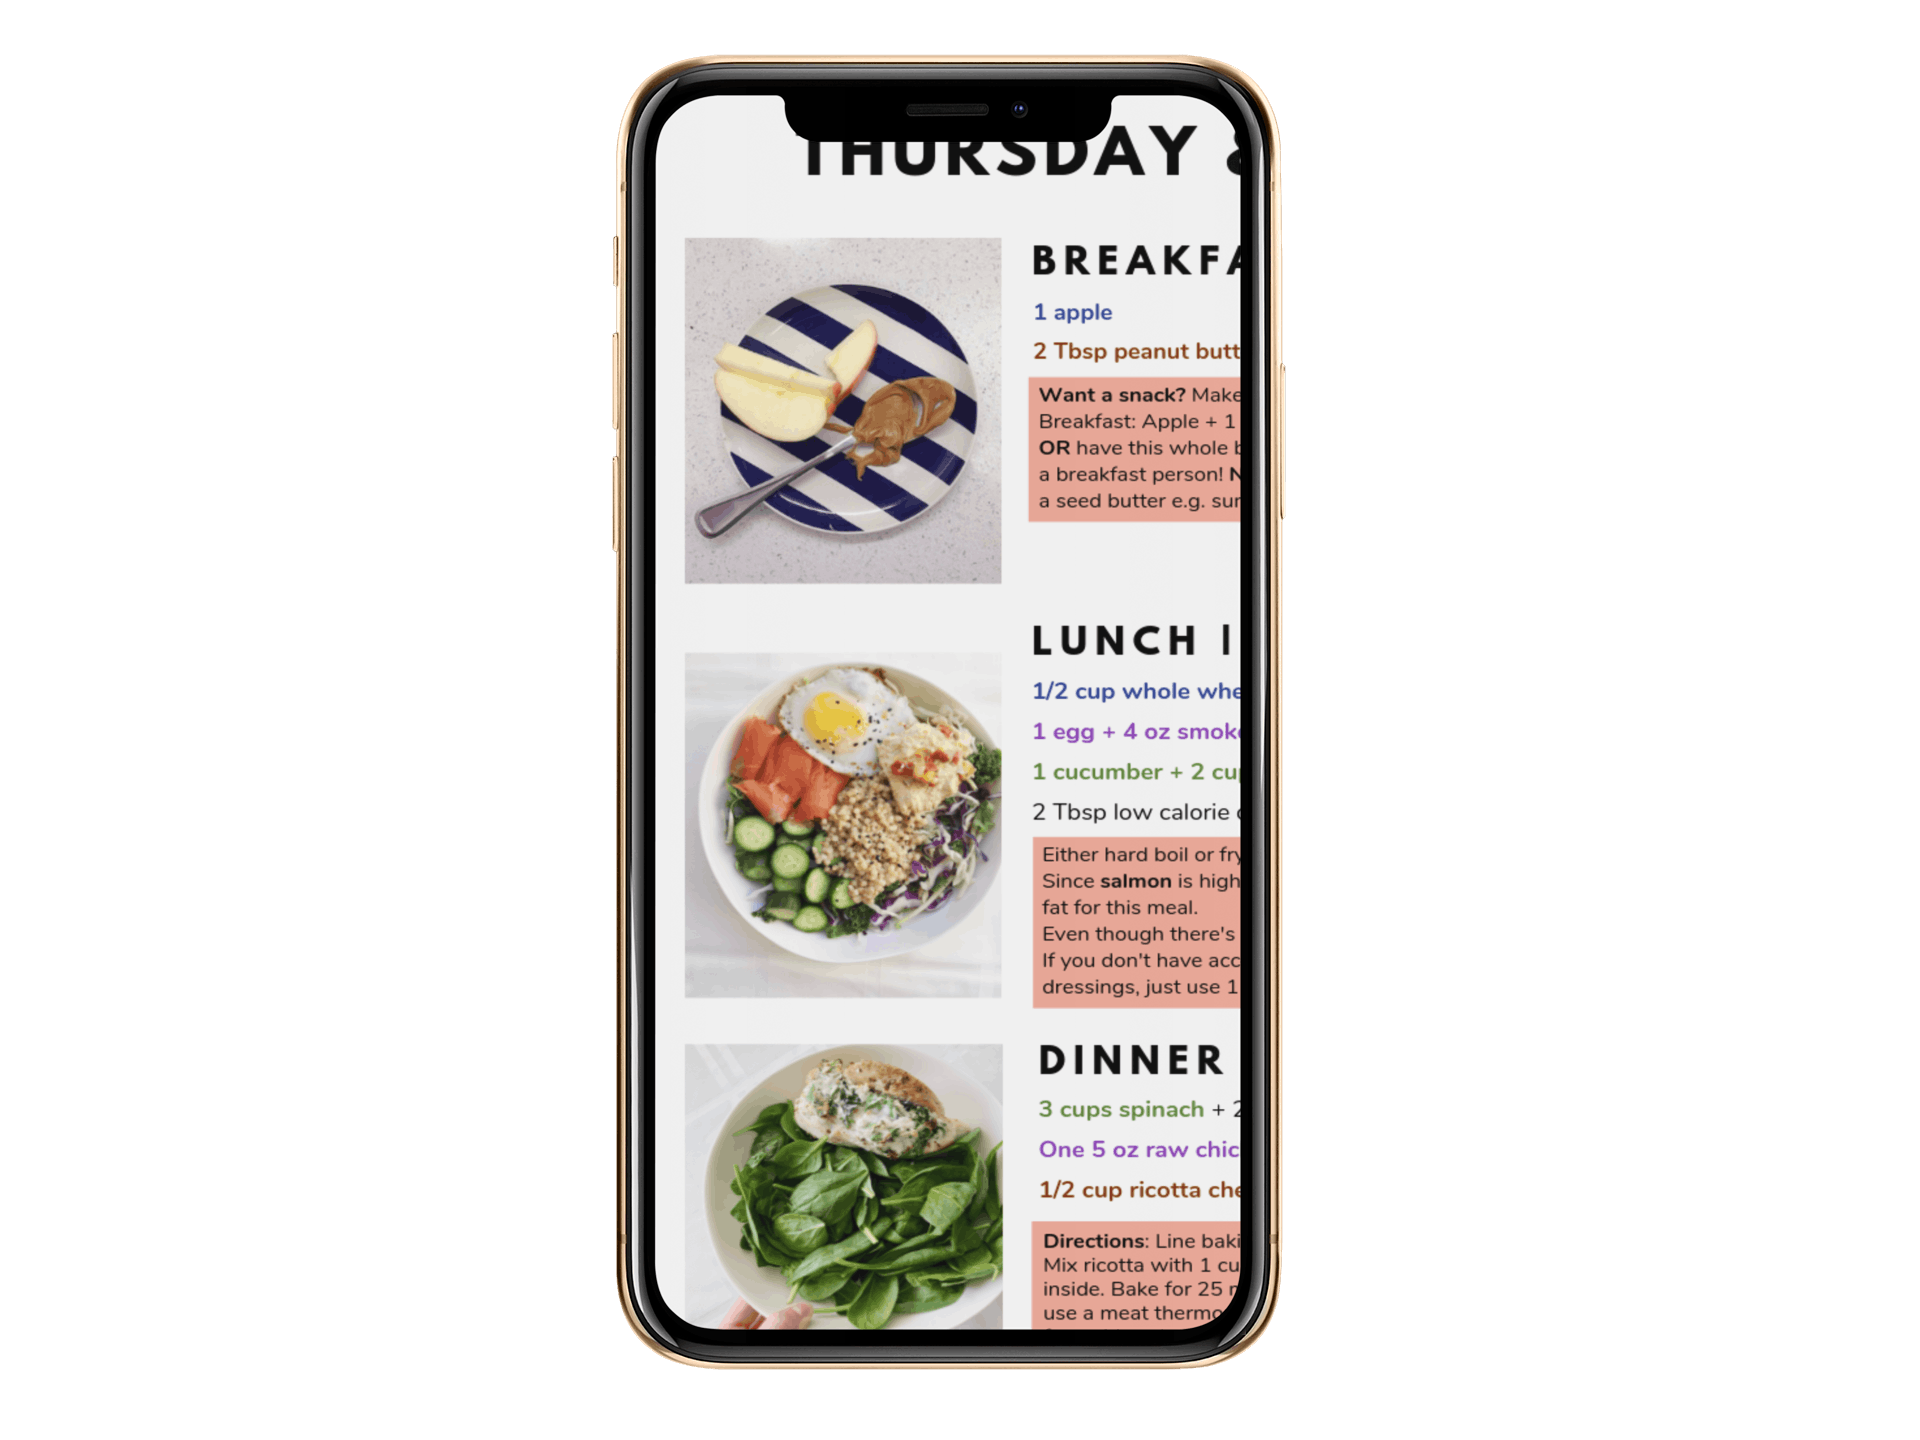 How To Make A Weekly Food Budget